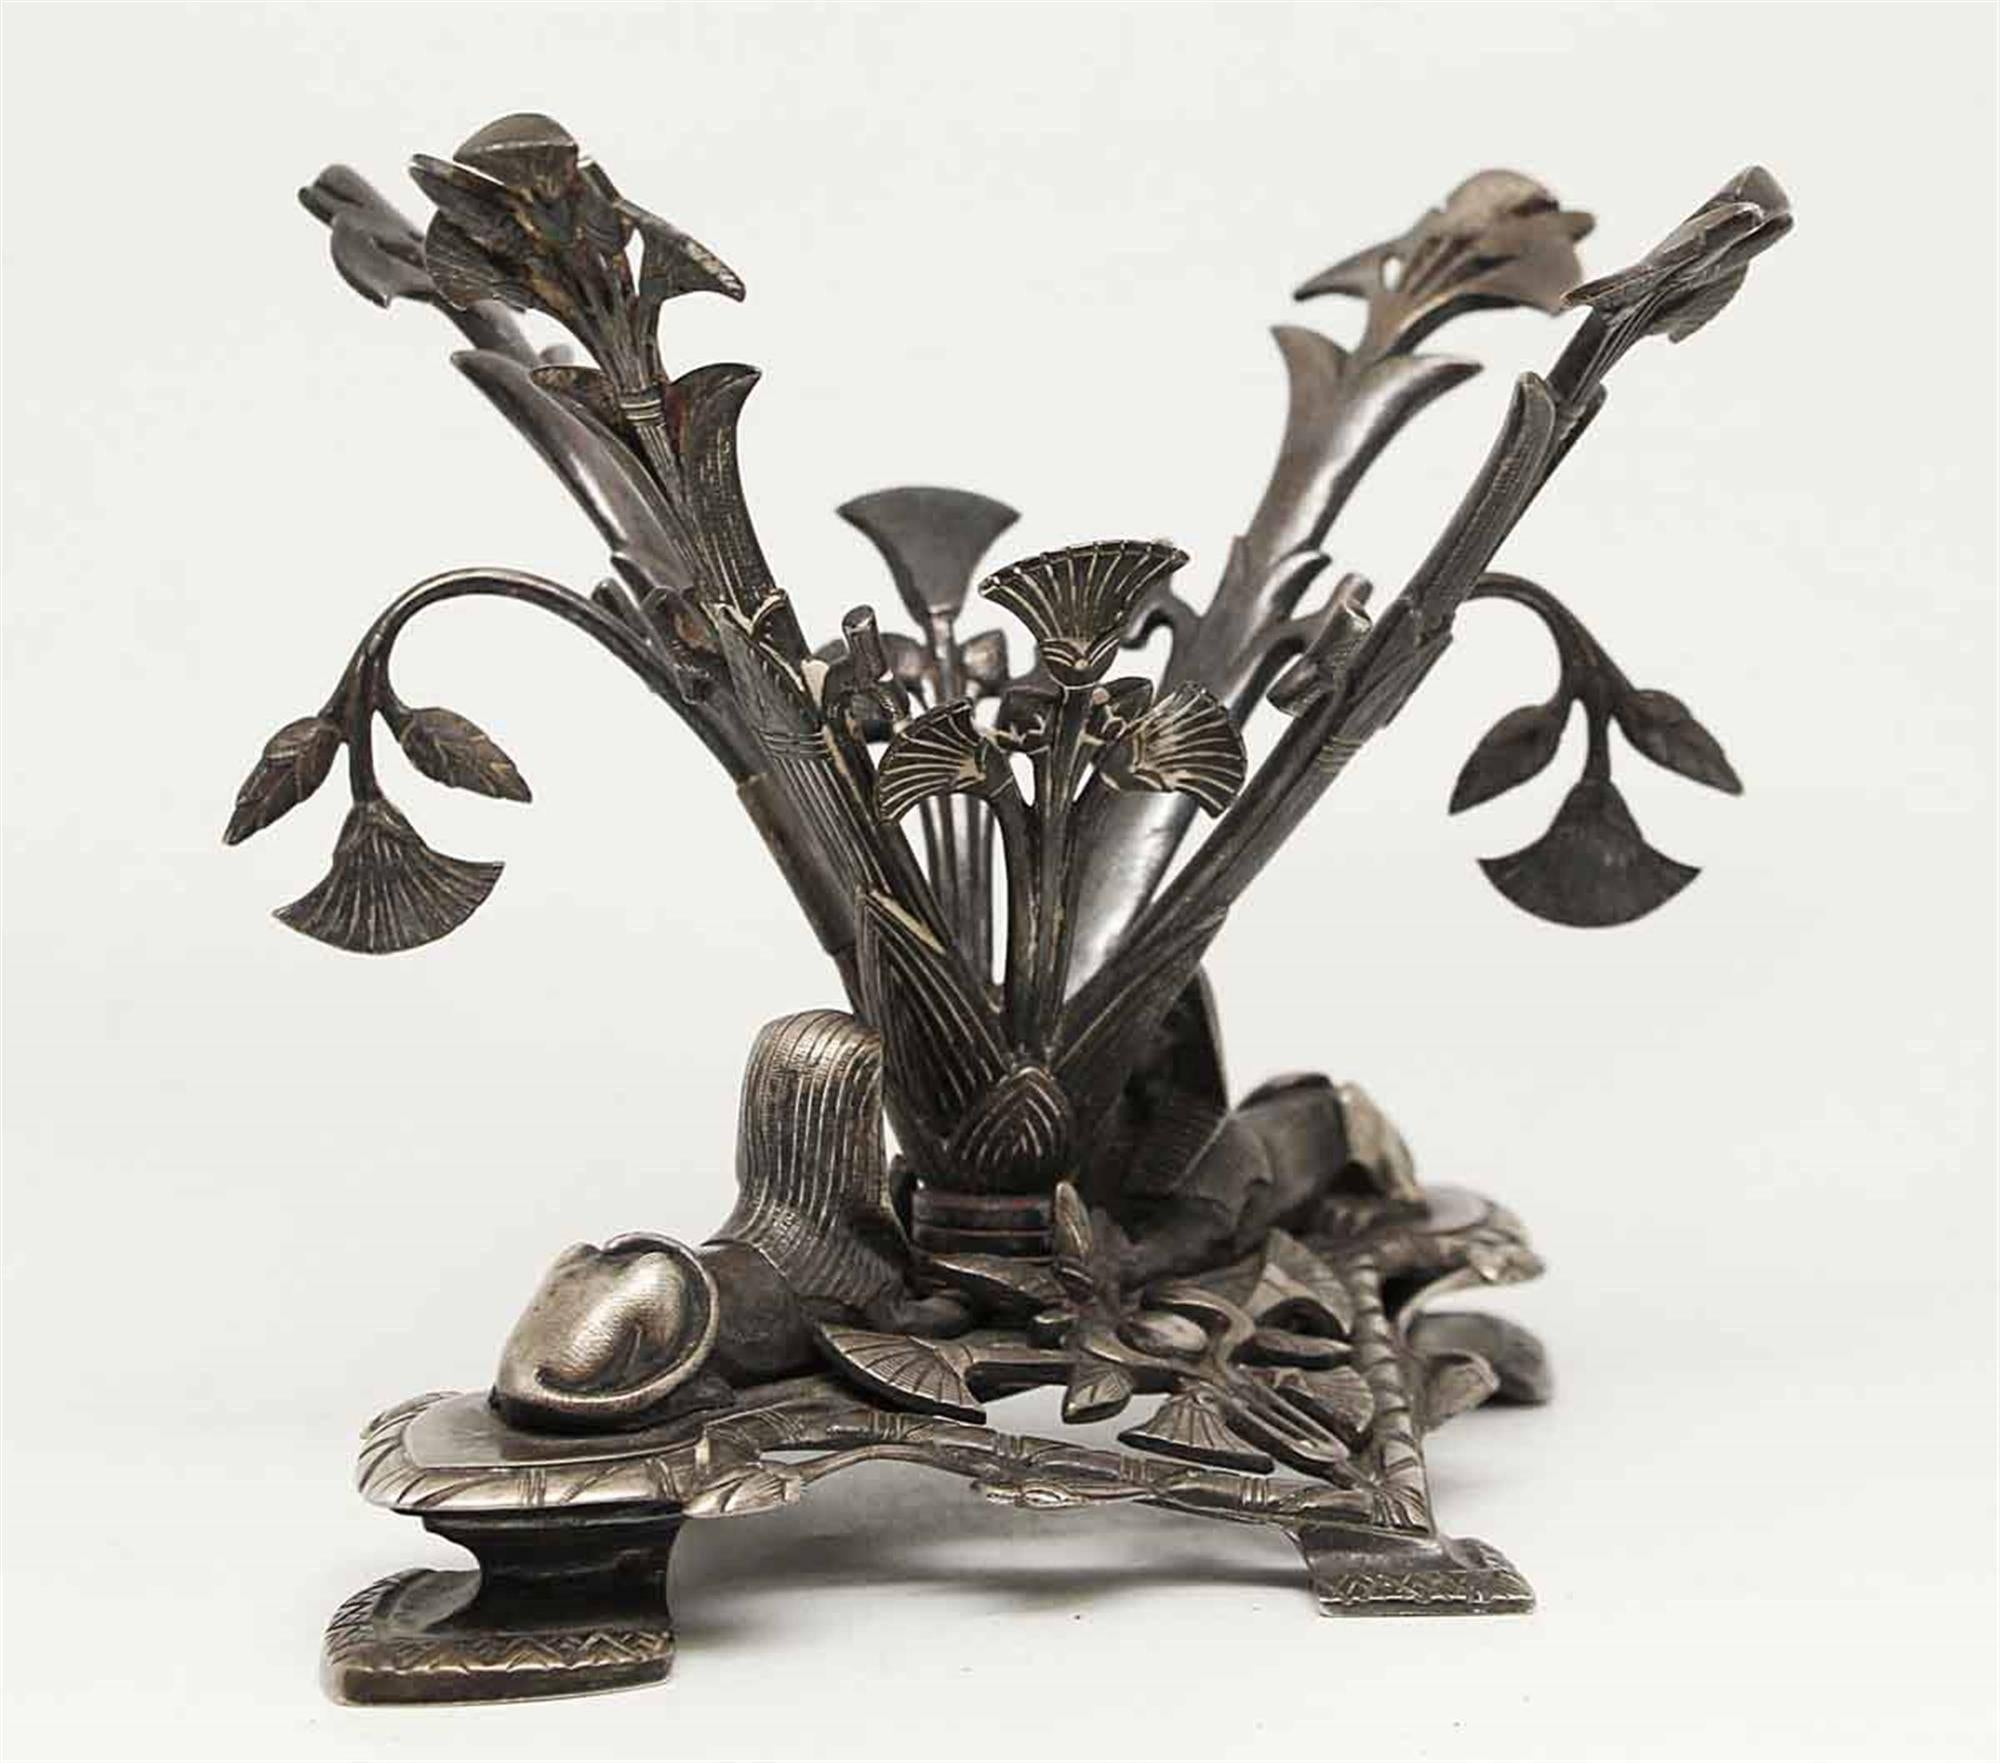 This is an 1878 Elkington & Co. silver plated Stand in an Egyptianesque style. The openwork base is modeled with two sphinxes and mythical creatures amidst stylized foliage, with four supports rising from the center, decorated with further foliate